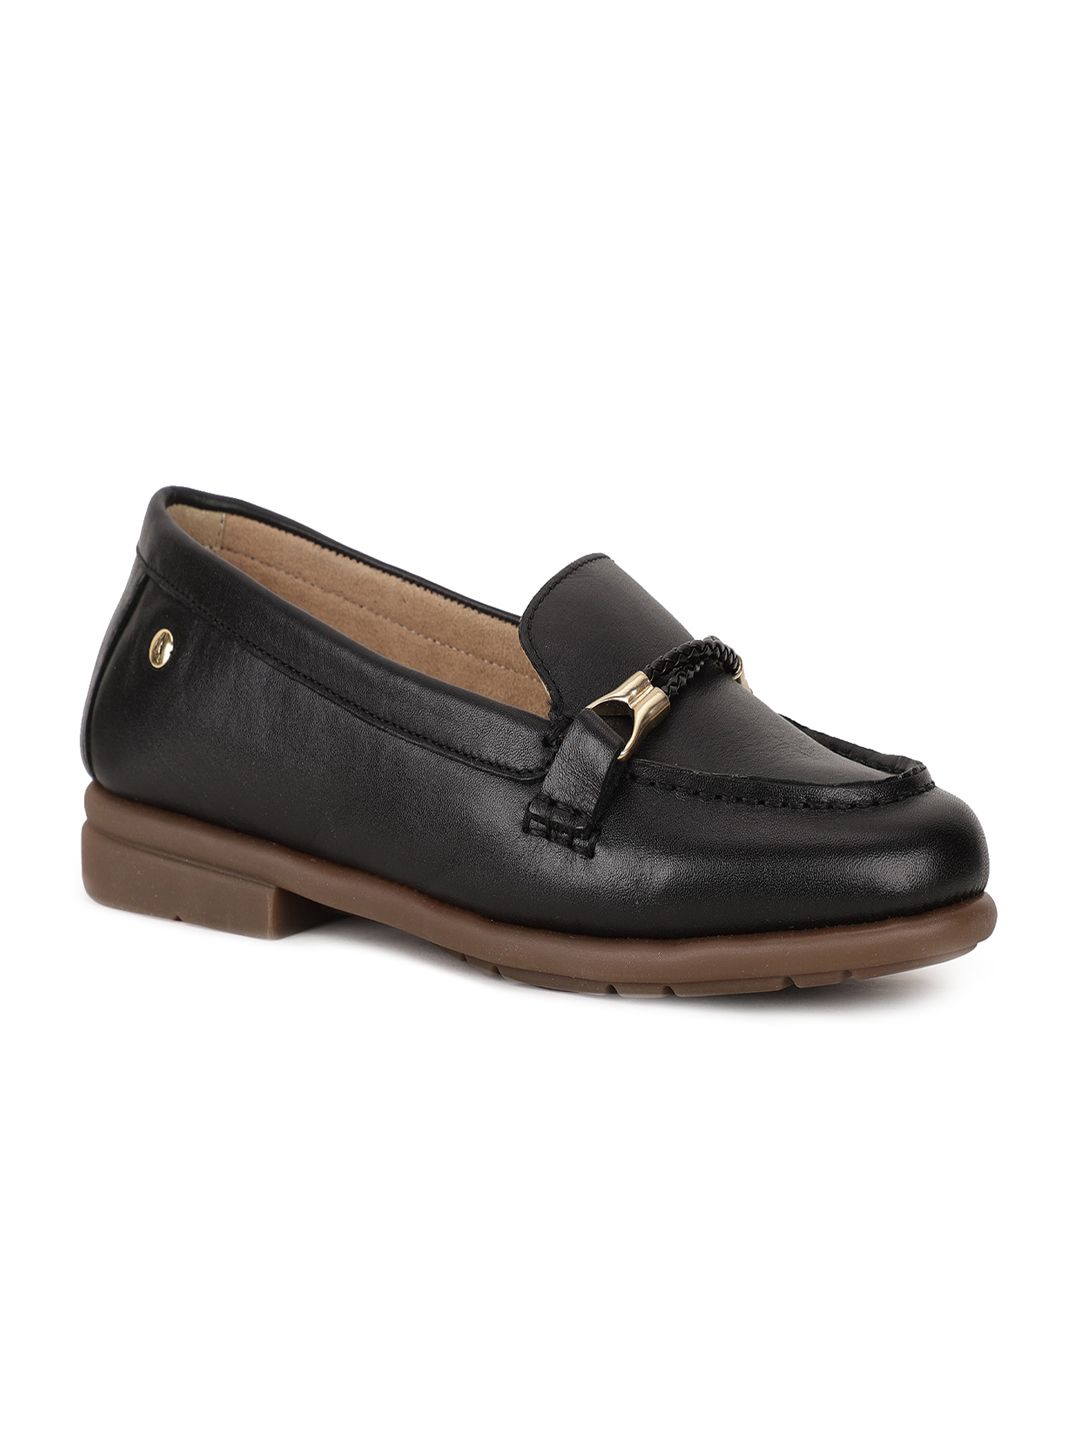 Hush Puppies Women Black Leather Loafers Price in India